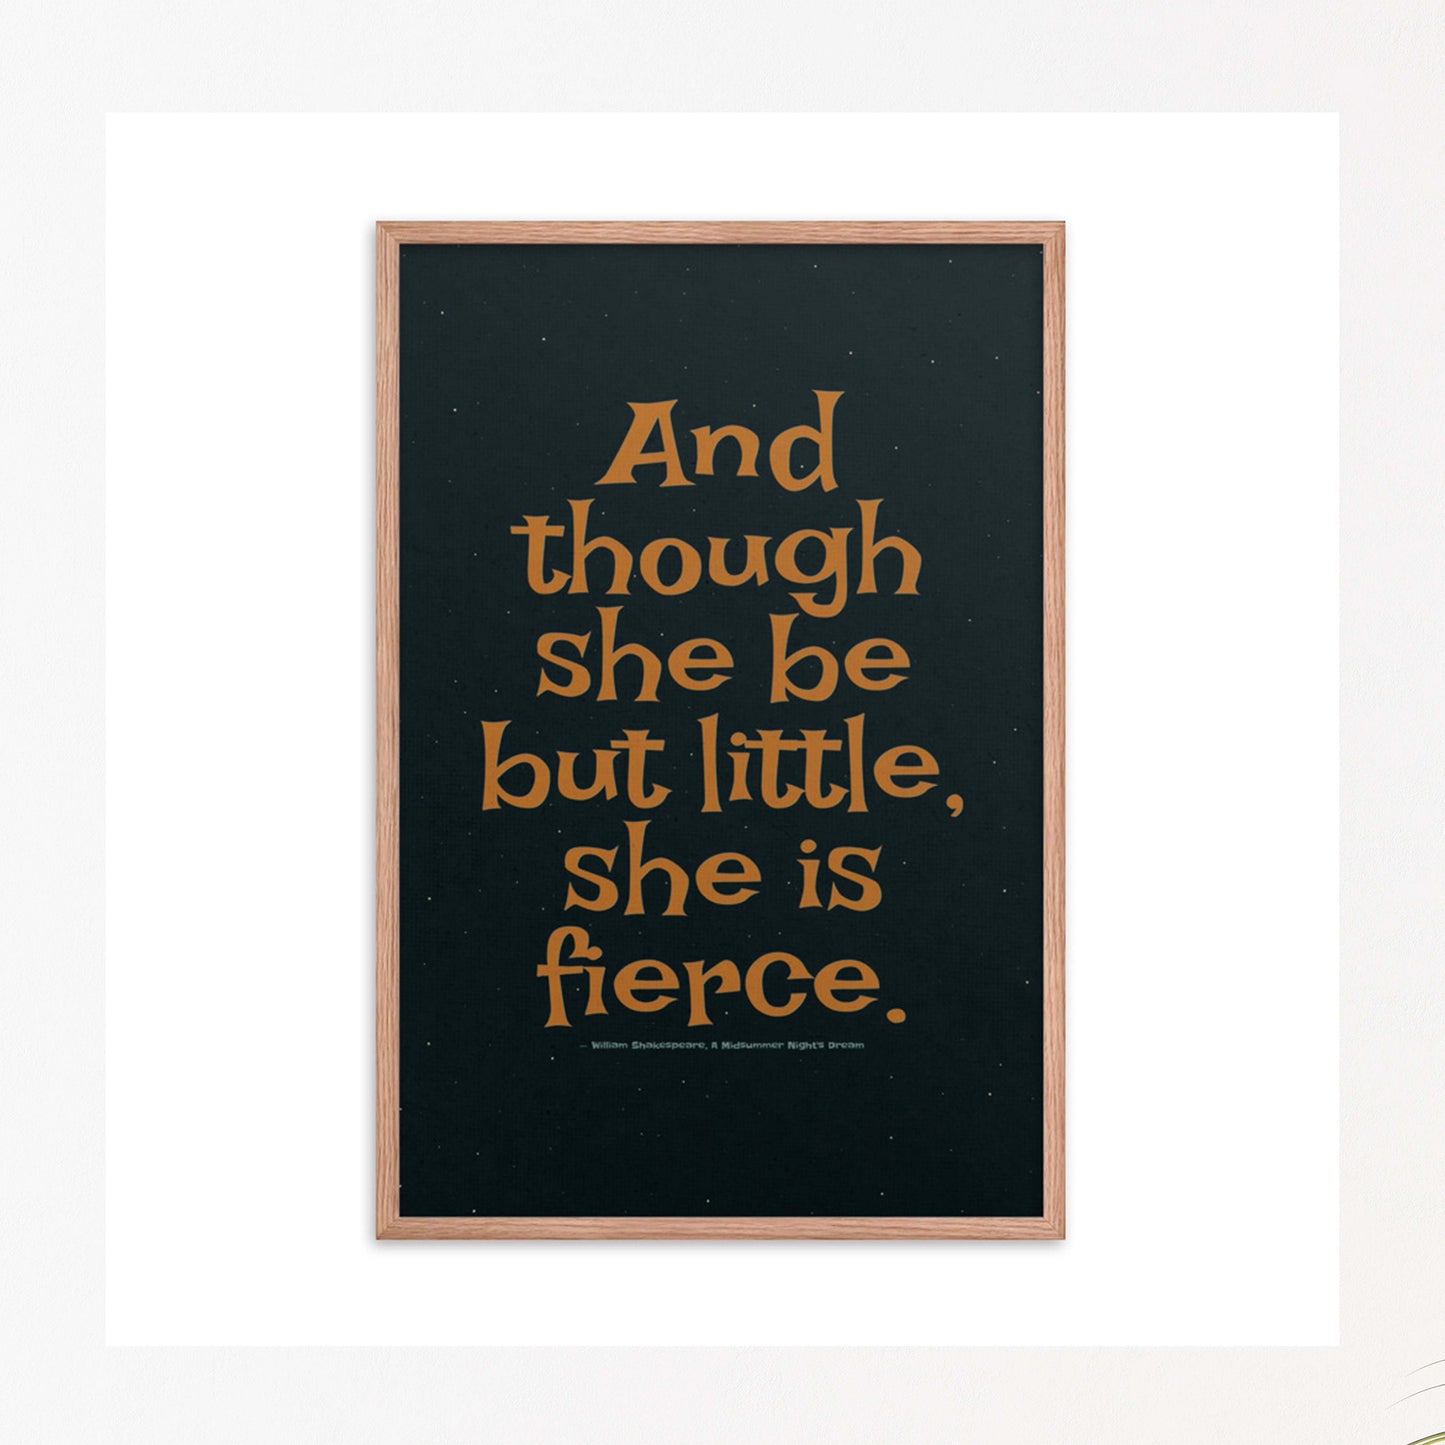 And though she be little but fierce - William Shakespeare quote orange text on black in oak frame